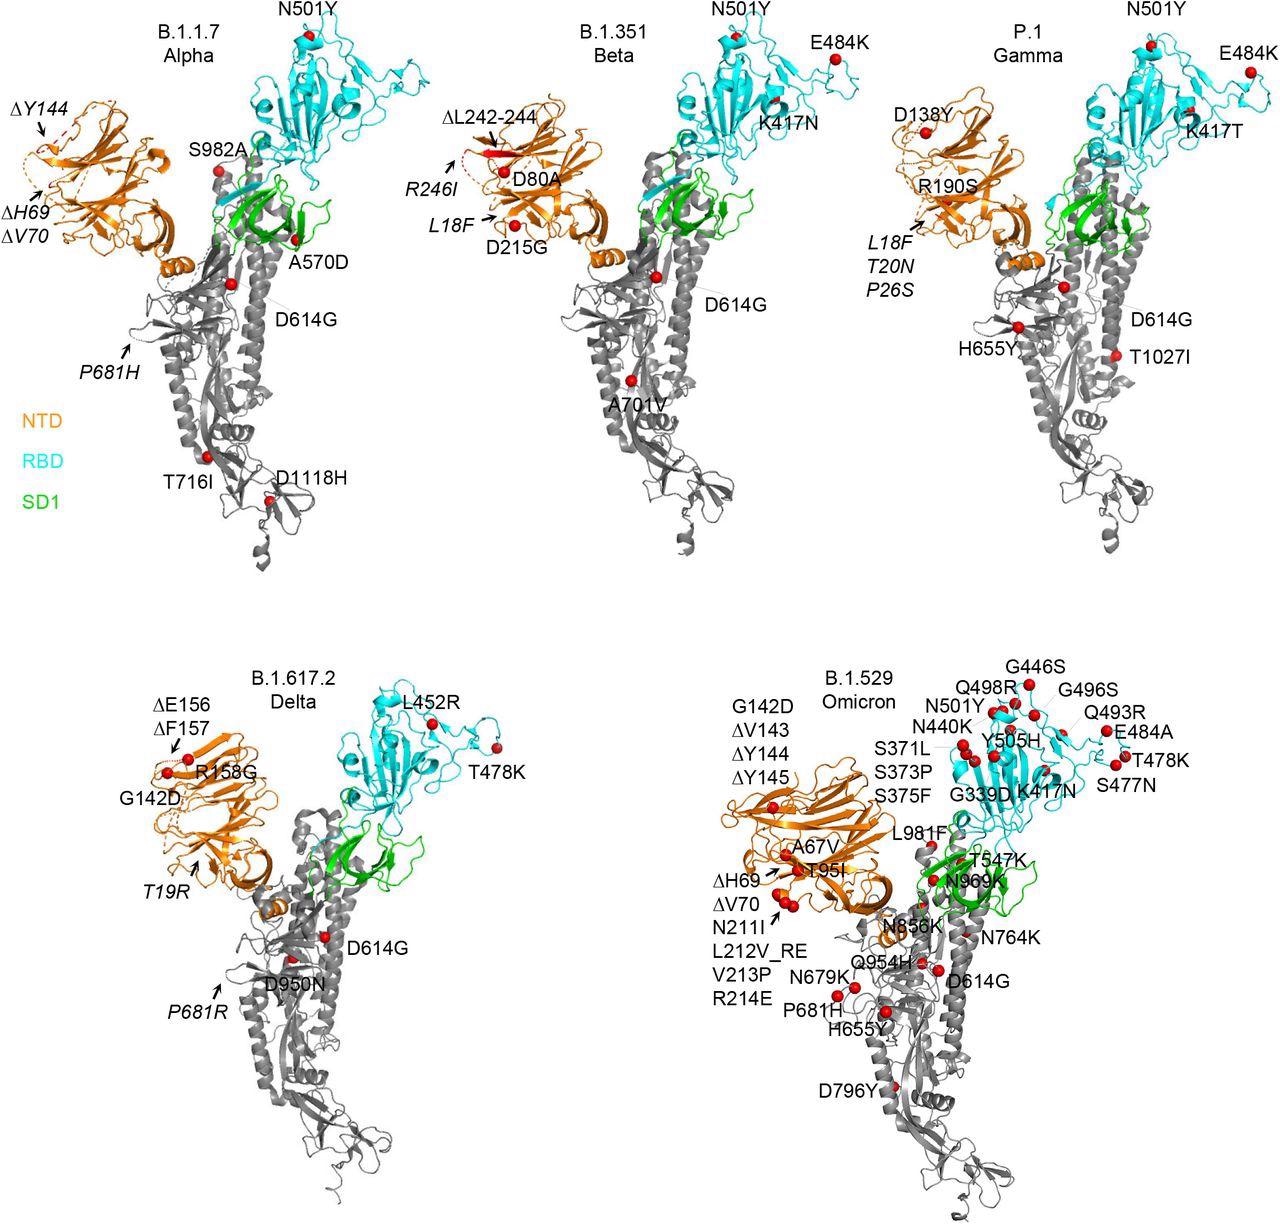 Structural modeling reveals a persistent D614G mutation, shared RBD mutations, and distinctive NTD mutations in five variants of concern. Structural models of a SARS-CoV-2 spike protomer from B.1.1.7, B.1.351, P.1, B.1.617.2, and B.1.1.529 variants. NTD, RBD, and SD1 domains are shown in orange, cyan, and green, respectively. Mutations are highlighted in the structural diagrams with a red sphere at Cα. Mutations at positions that are not resolved in the cryo-EM structure are labeled in italics with arrows pointing to the disordered regions (shown with dashed lines).